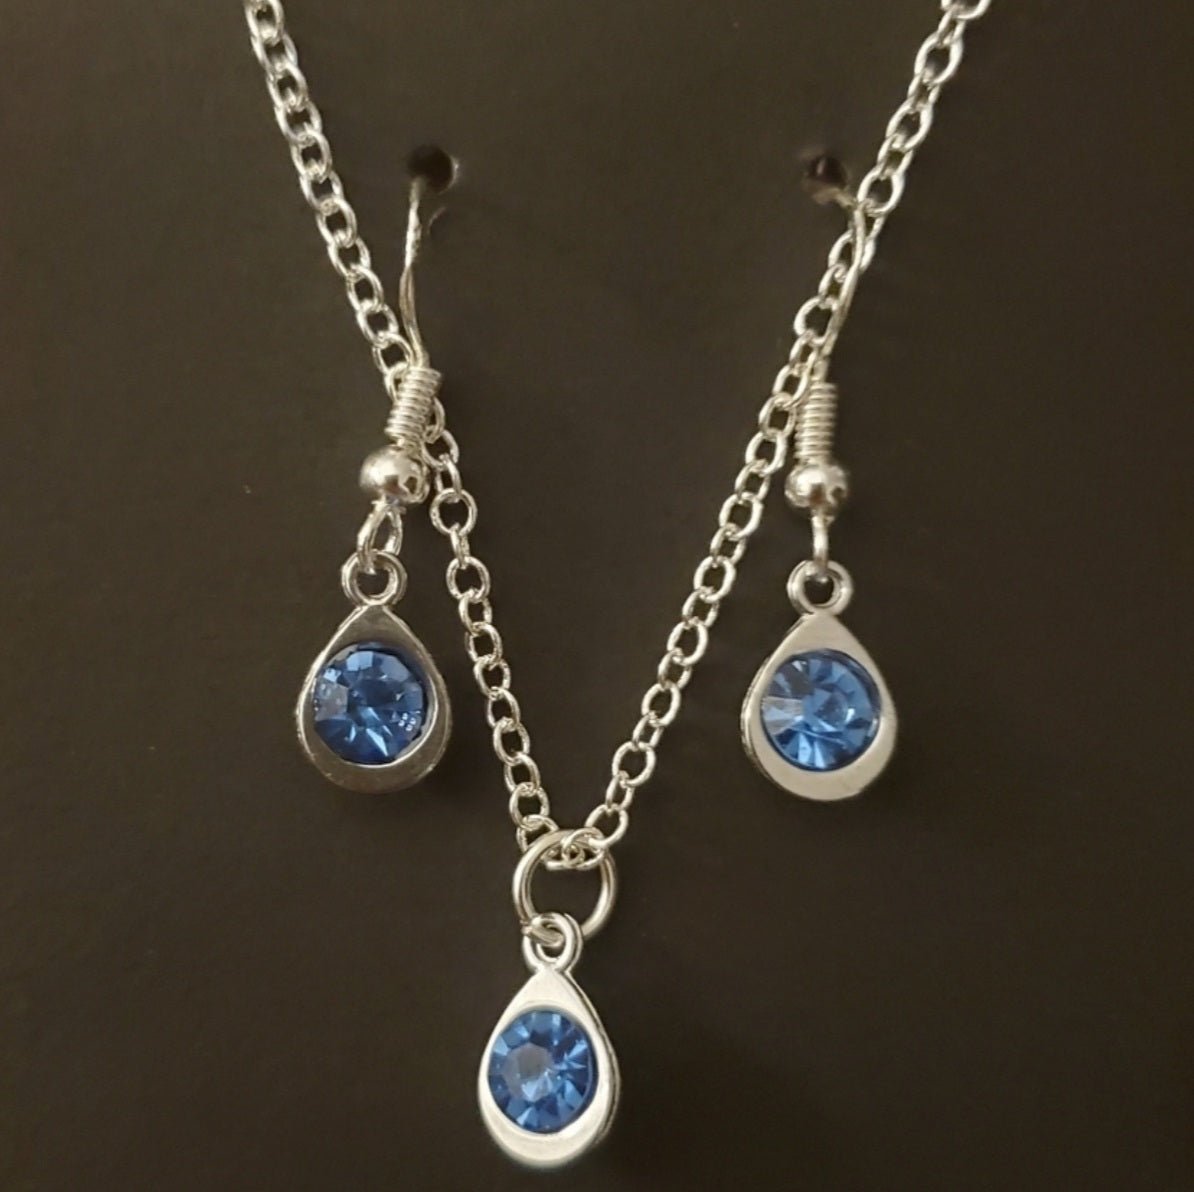 Birthstone Necklace & Earring Jewelry Sets- pick 1